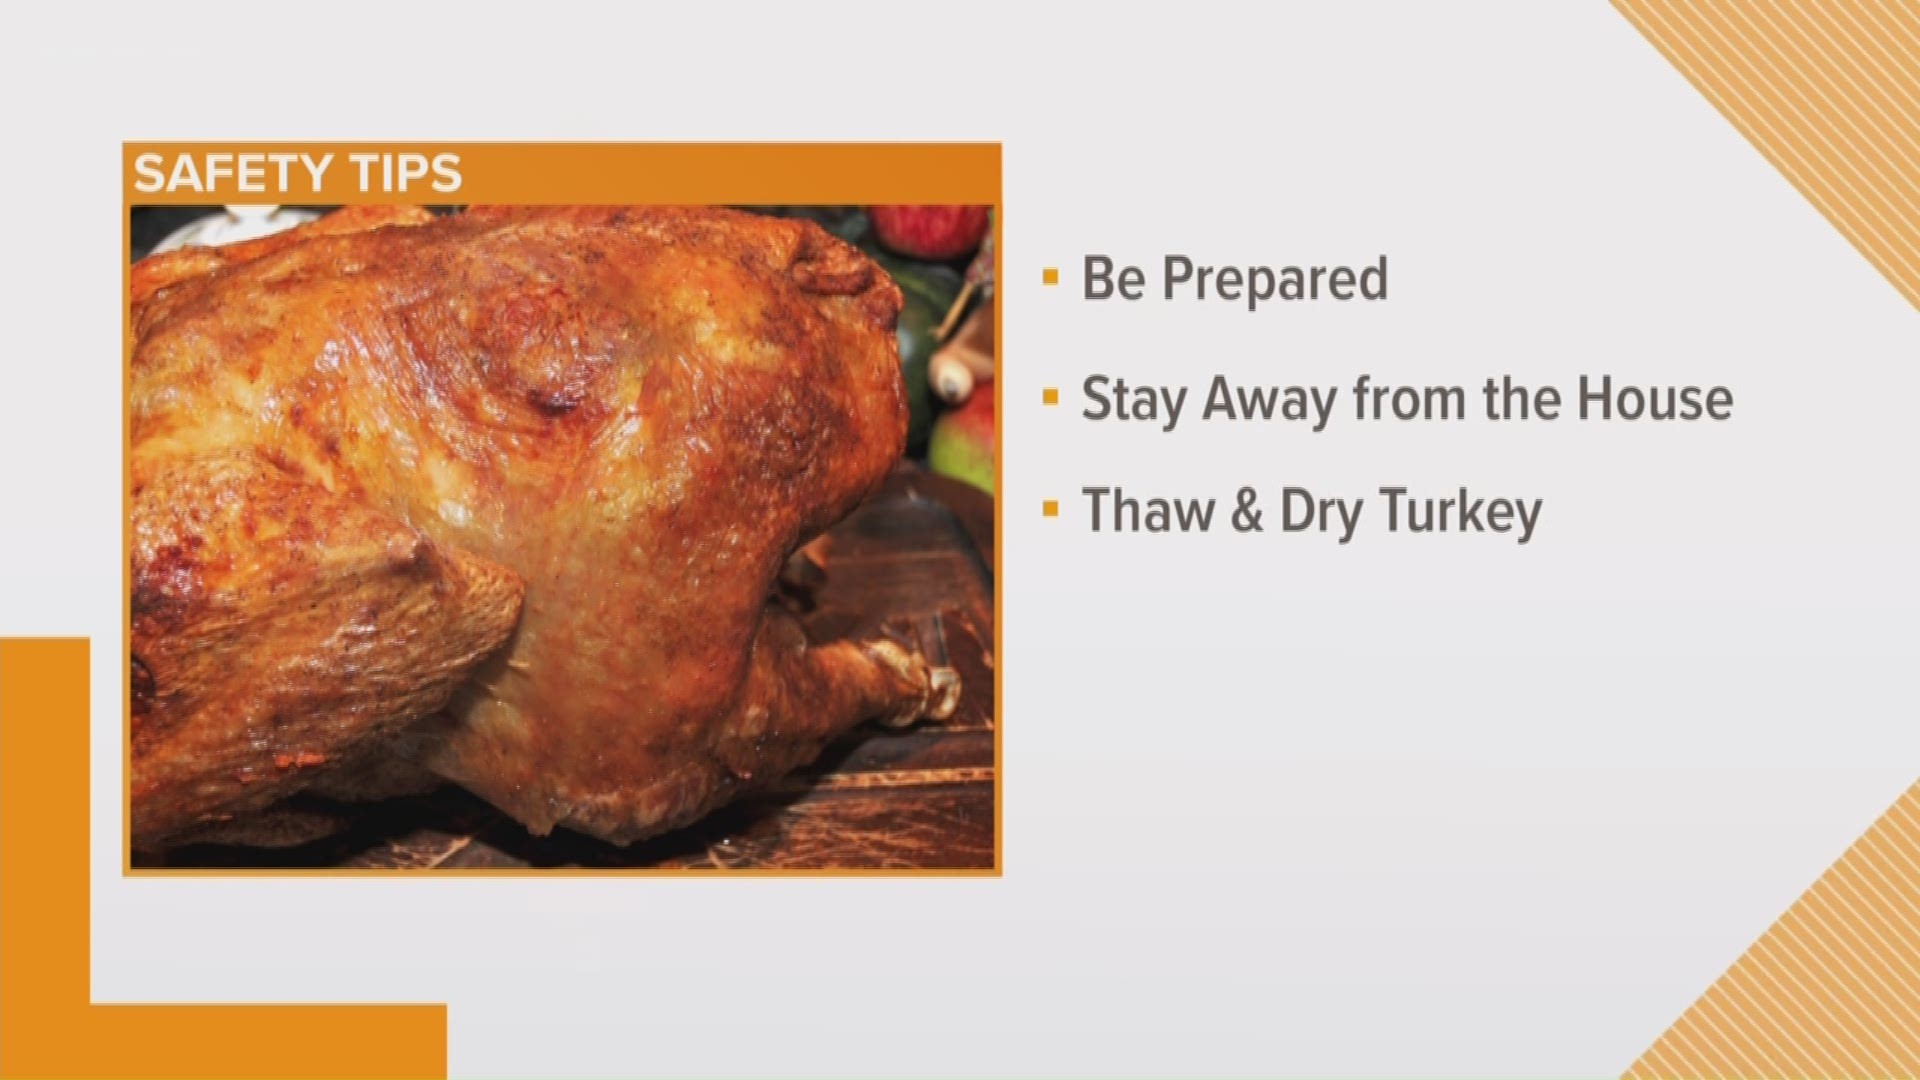 Chef Nathan Richard from Cavan Restaurant, is showing us how to safely fry a turkey for your Thanksgiving dinner.